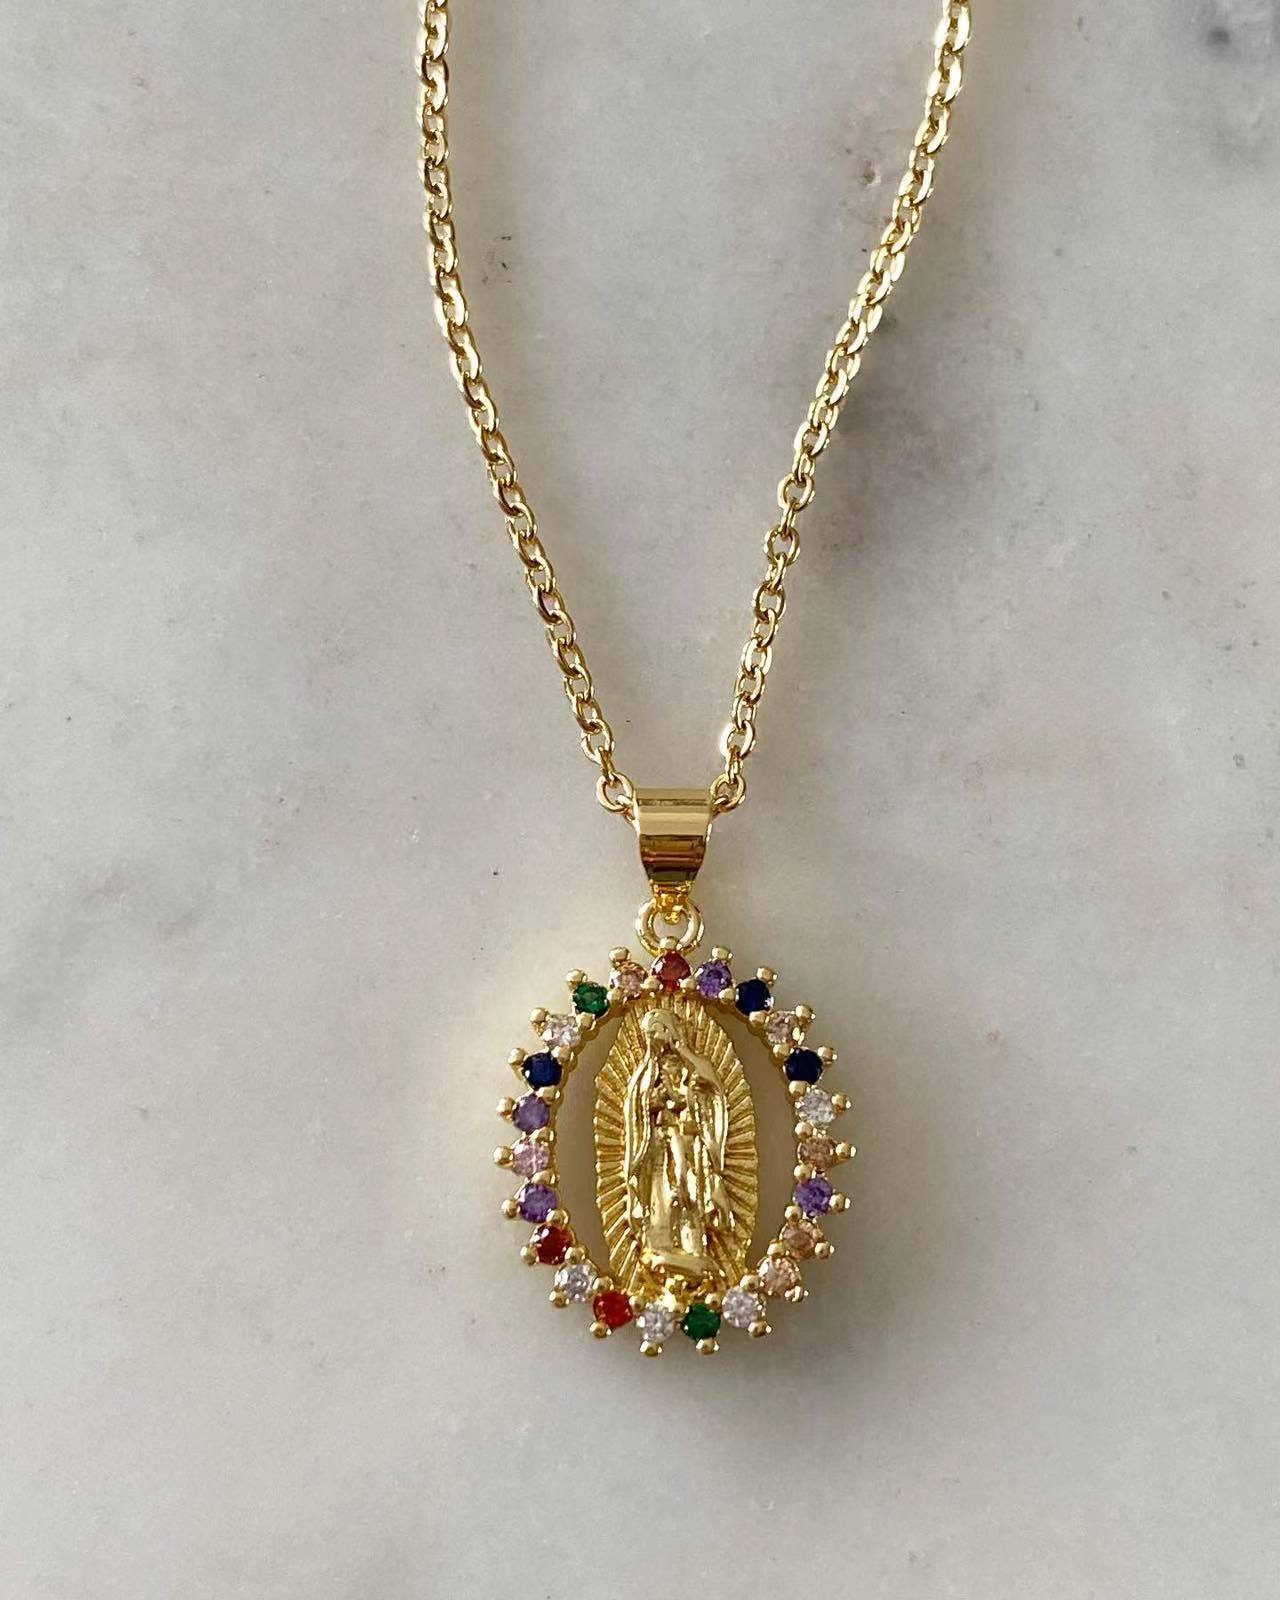 Our Lady of Guadalupe Small Multicolored Necklace